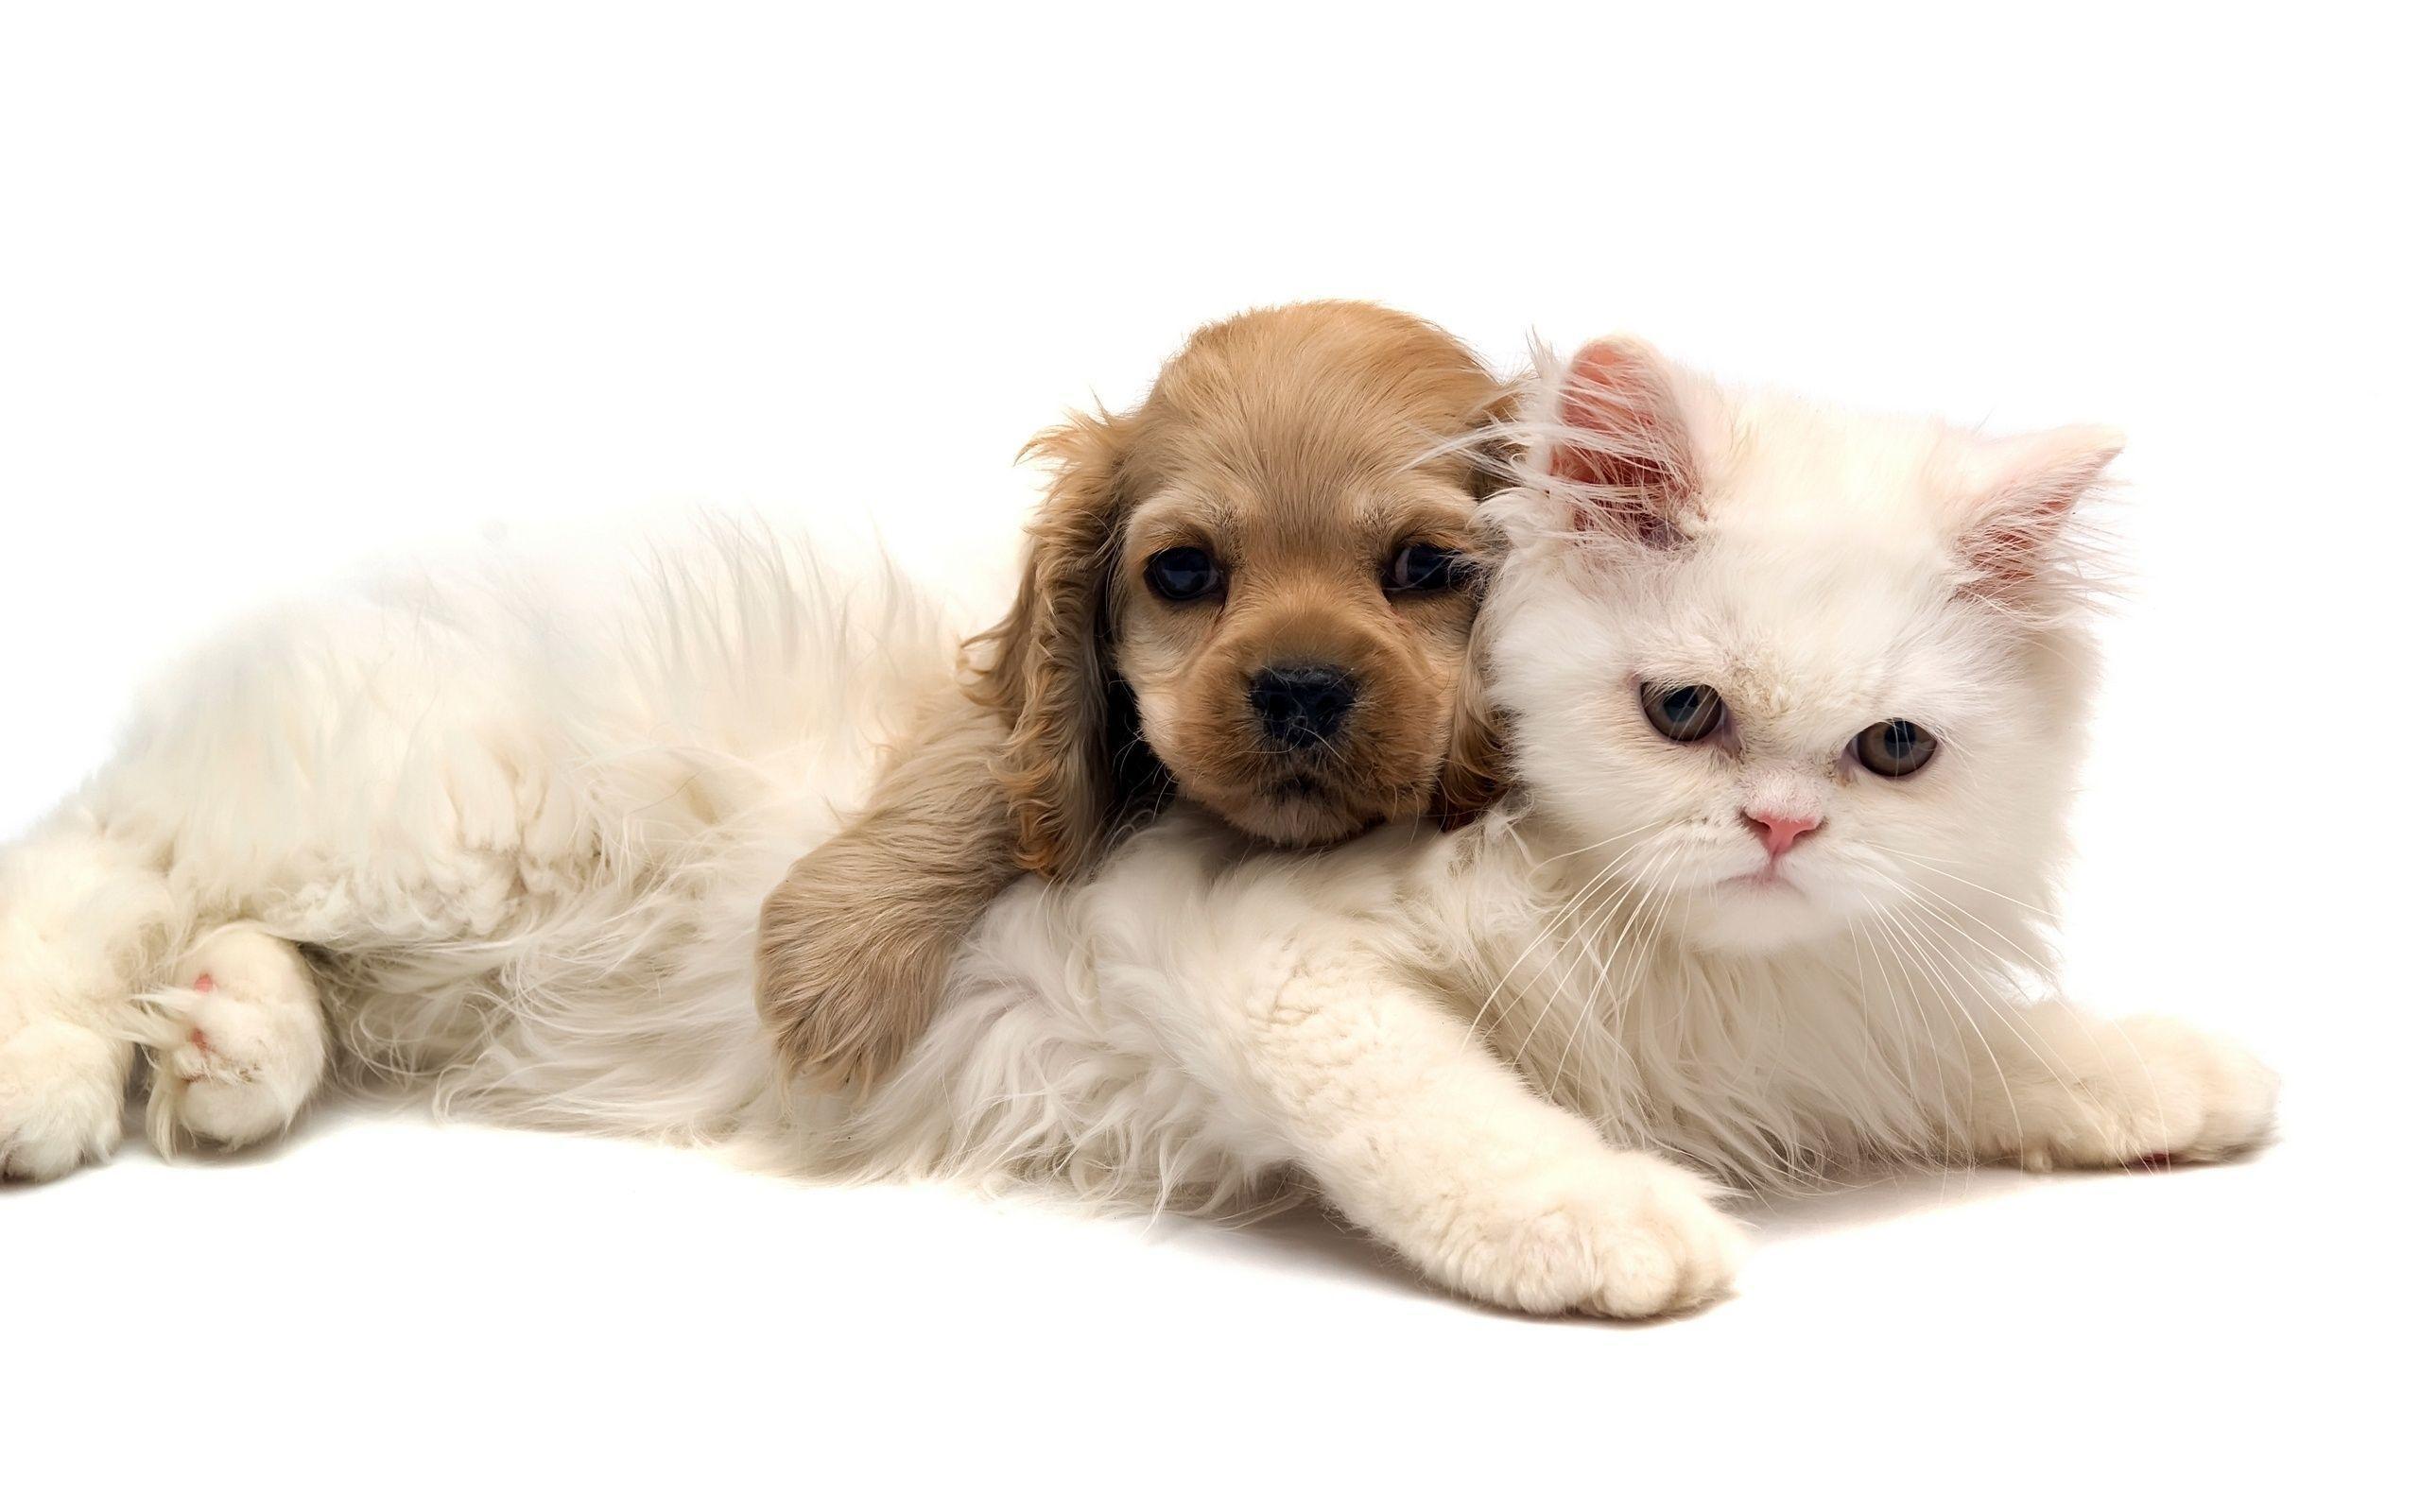 Cat and dog wallpaper and image, picture, photo